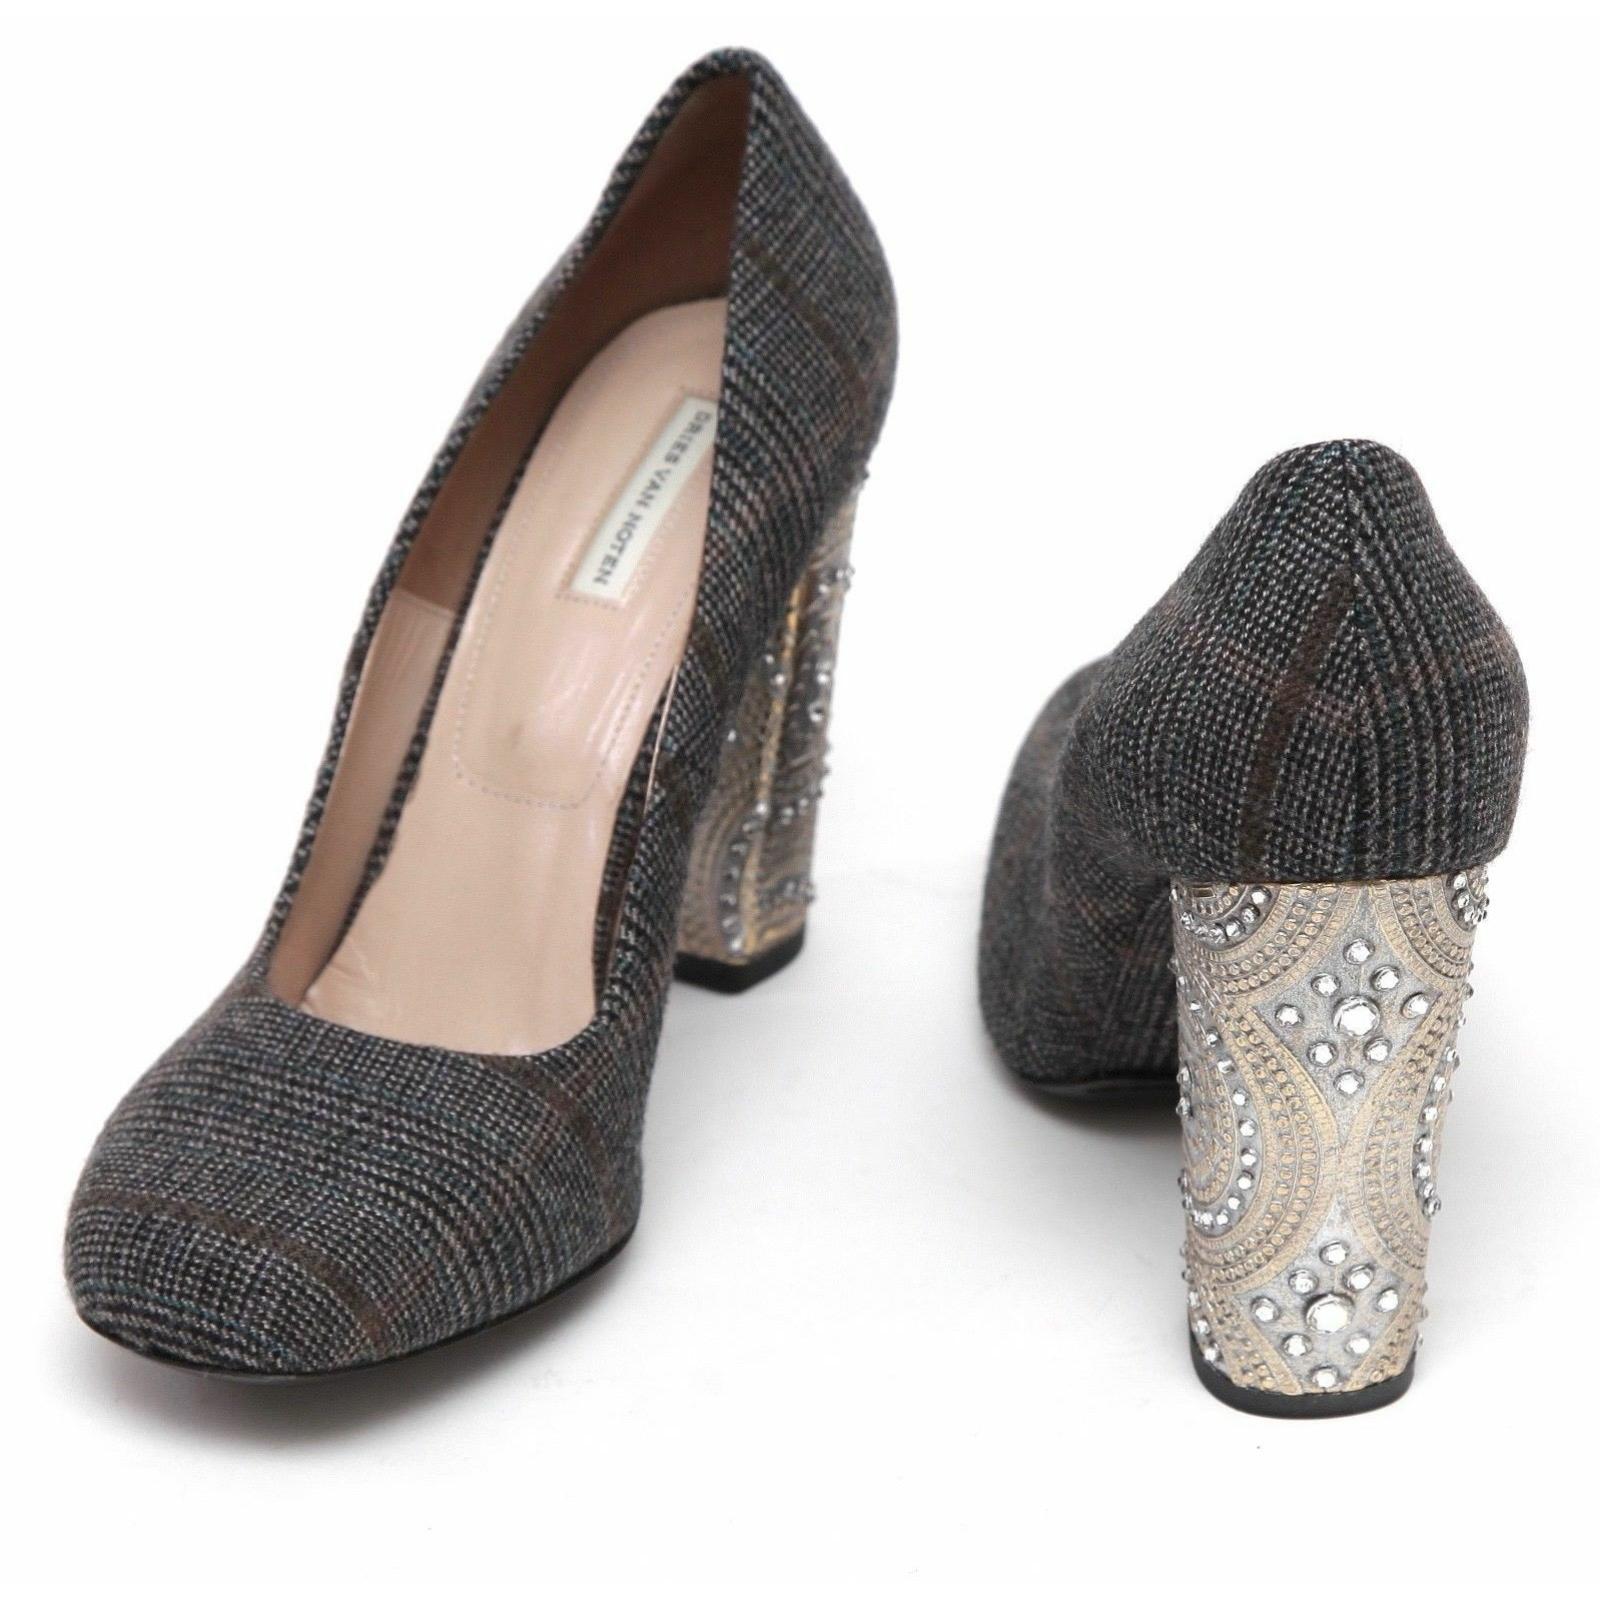 DRIES VAN NOTEN Pump Wool Plaid Check Leather Crystal Square Toe Sz 39.5 NEW 1